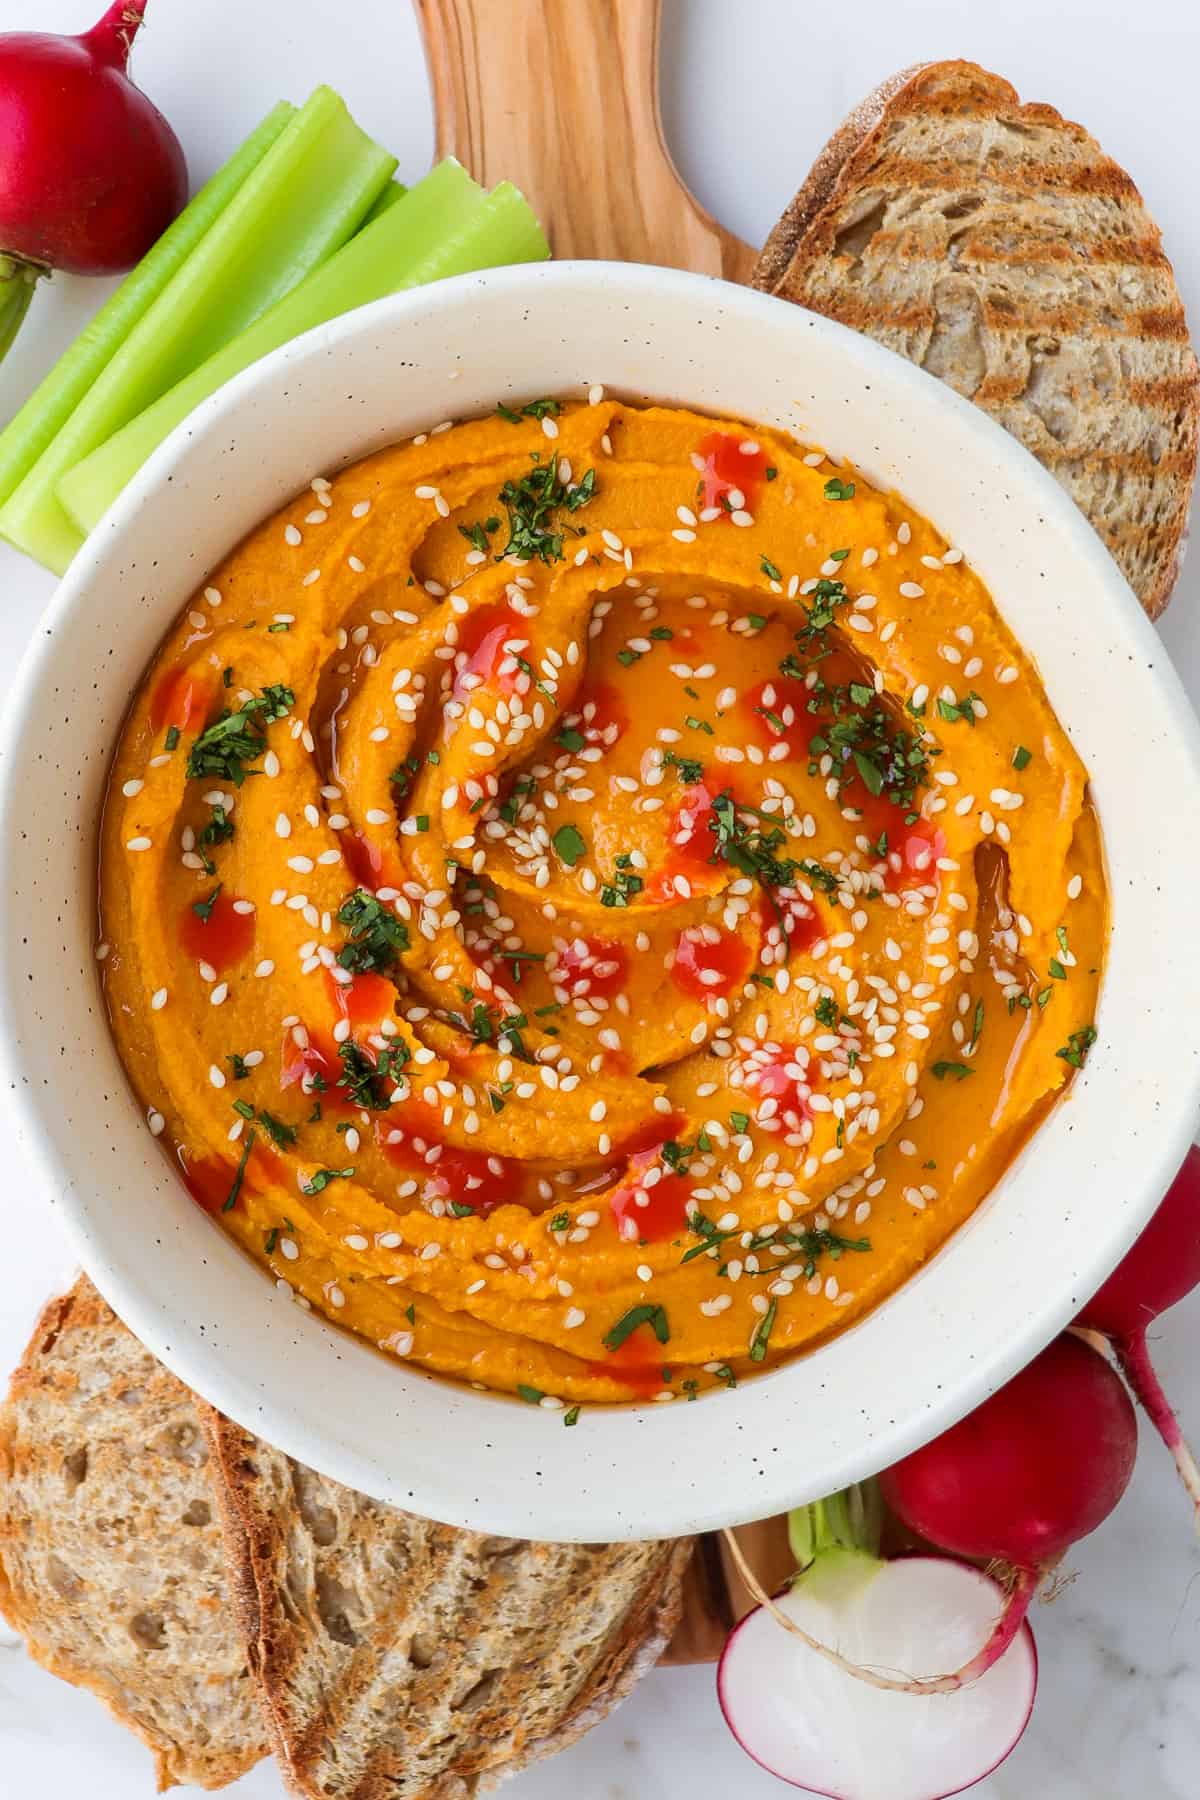 Carrot hummus in a bowl with vegetable crudités and toasted bread.